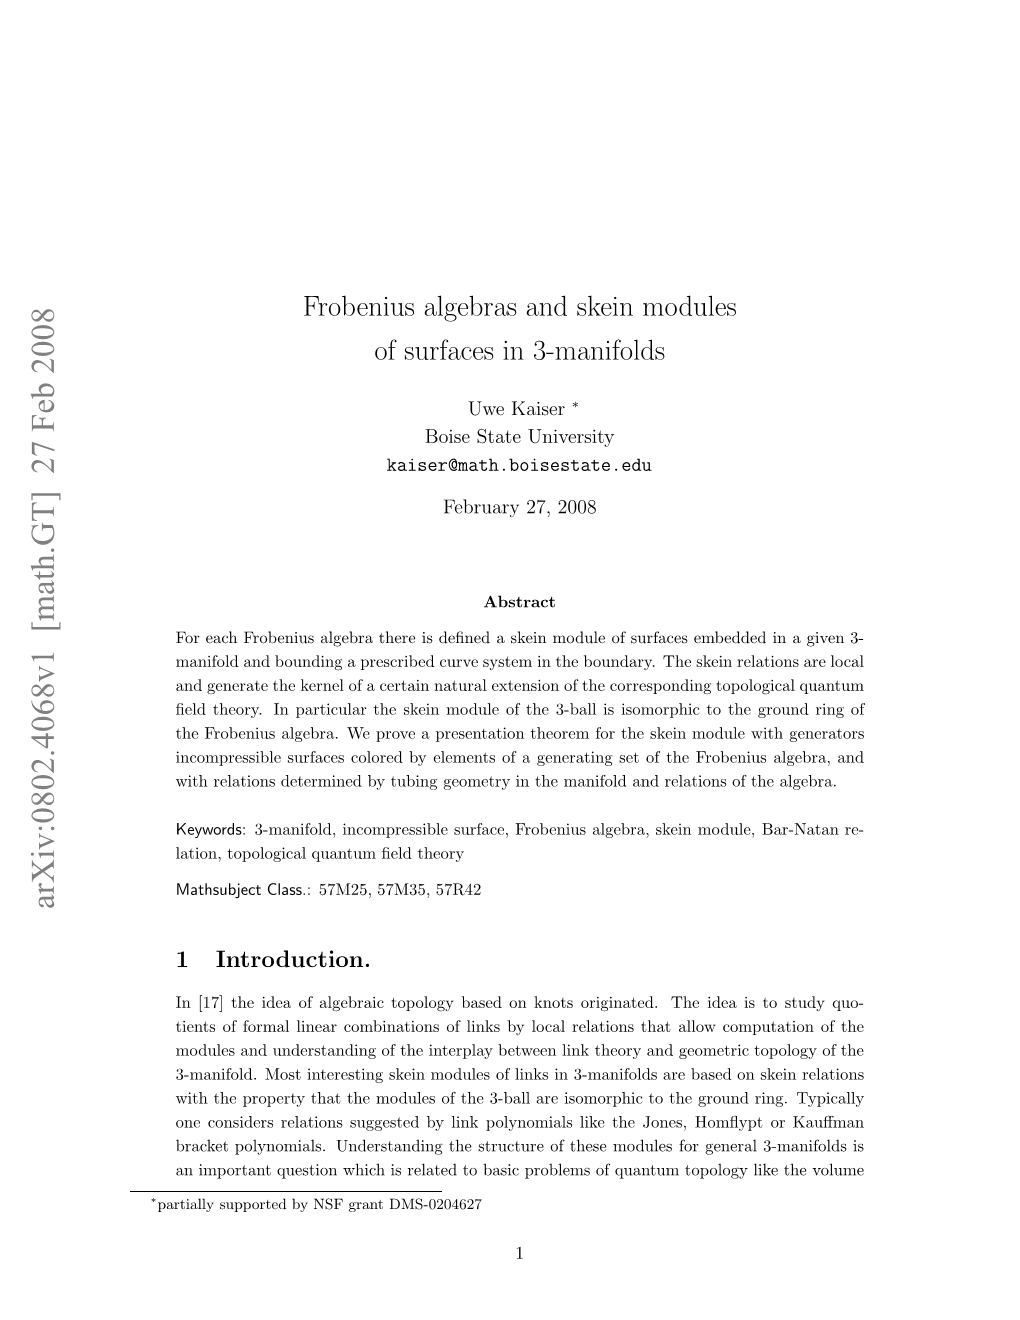 Frobenius Algebras and Skein Modules of Surfaces in 3-Manifolds